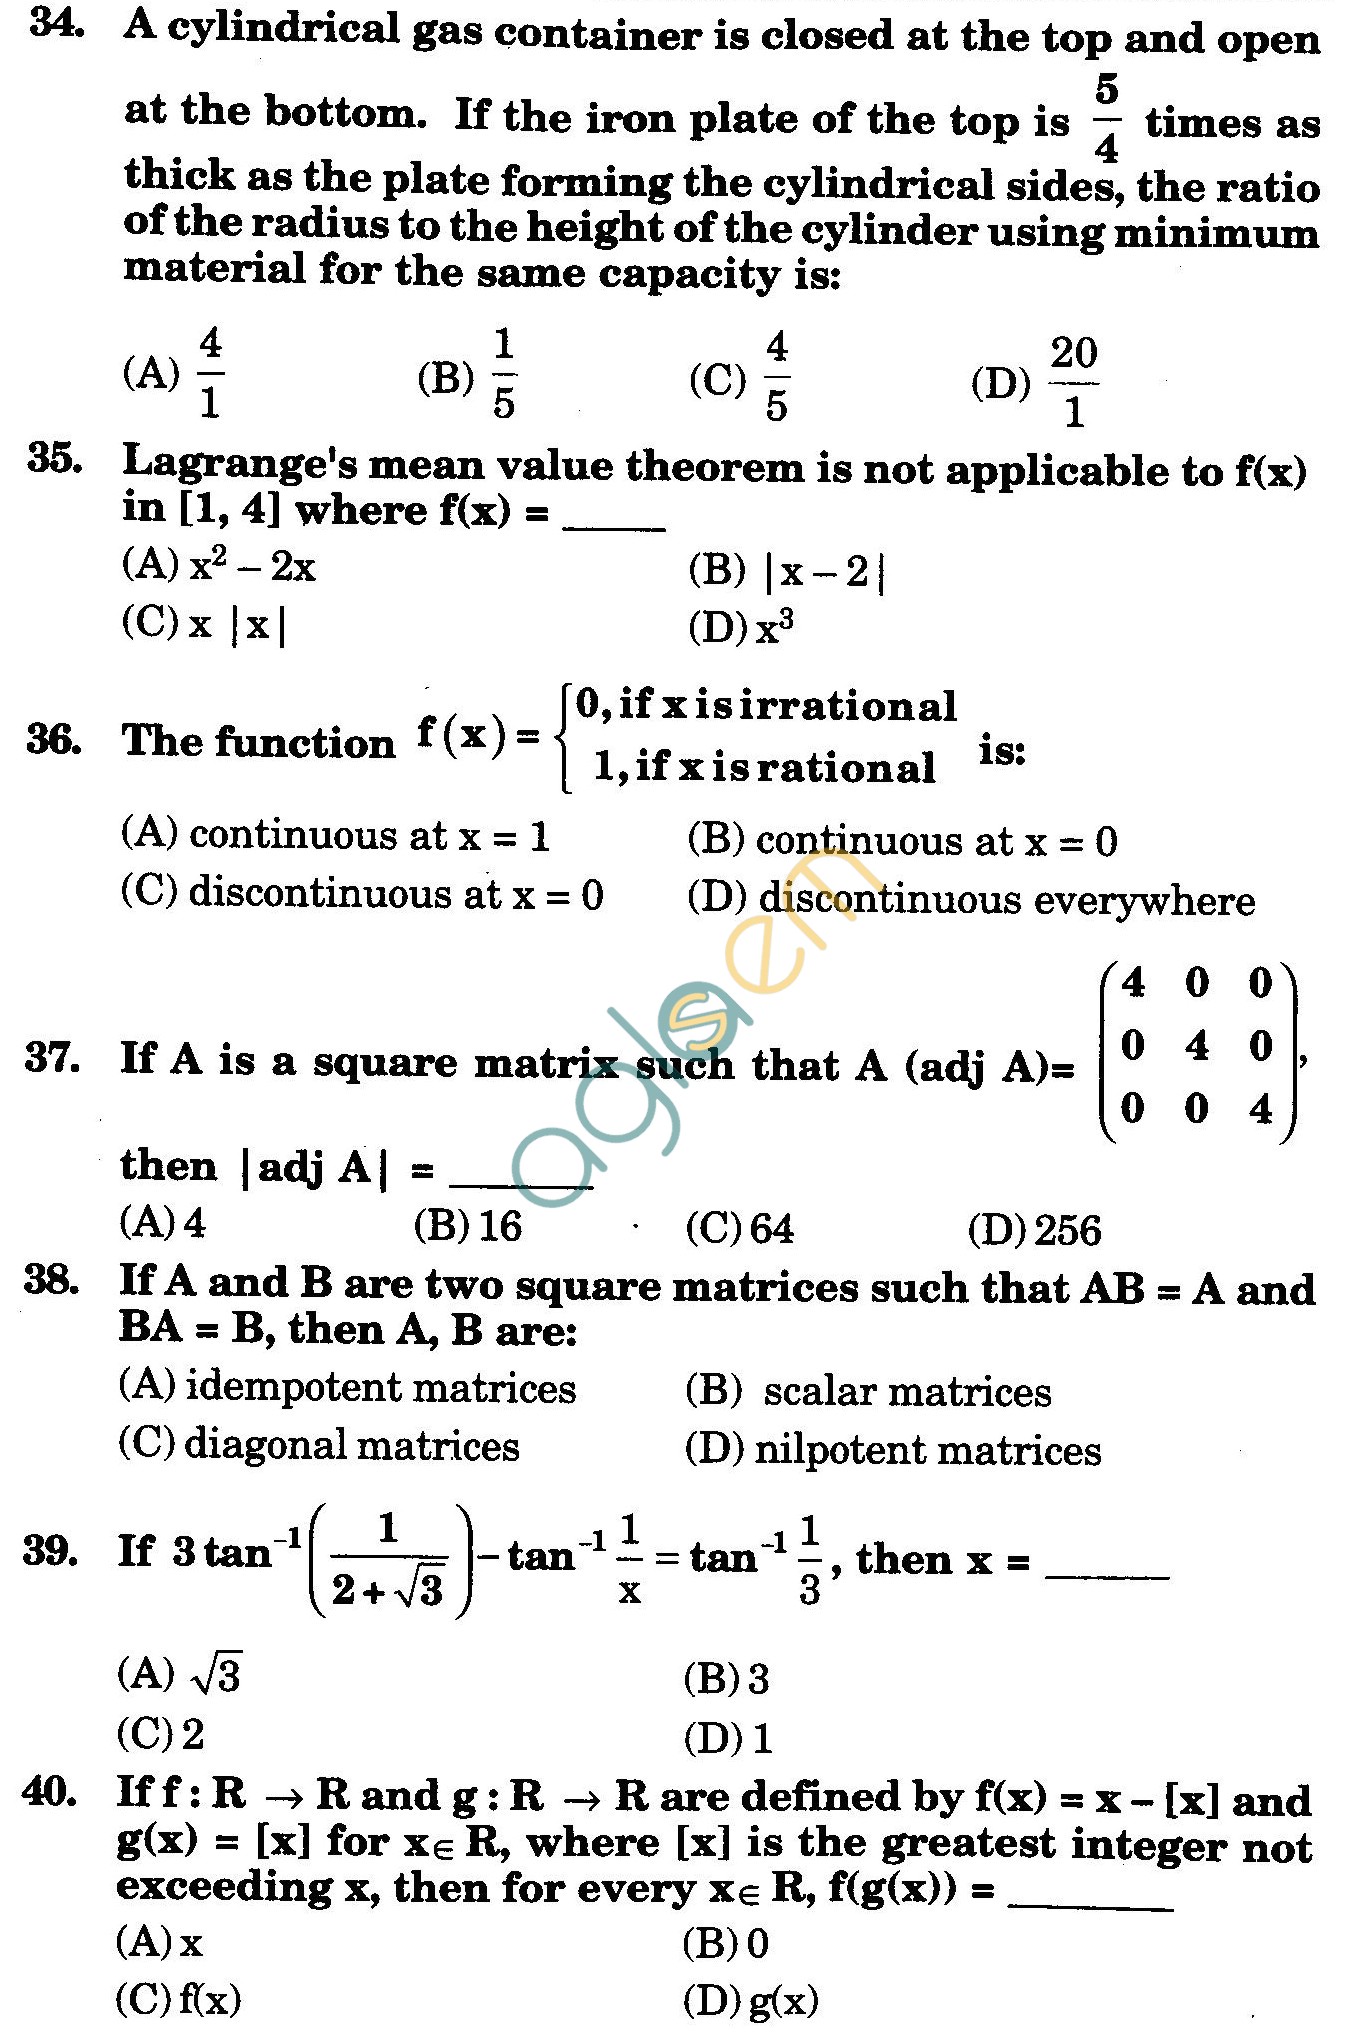 NSTSE 2009 Class XII PCM Question Paper with Answers - Mathematics